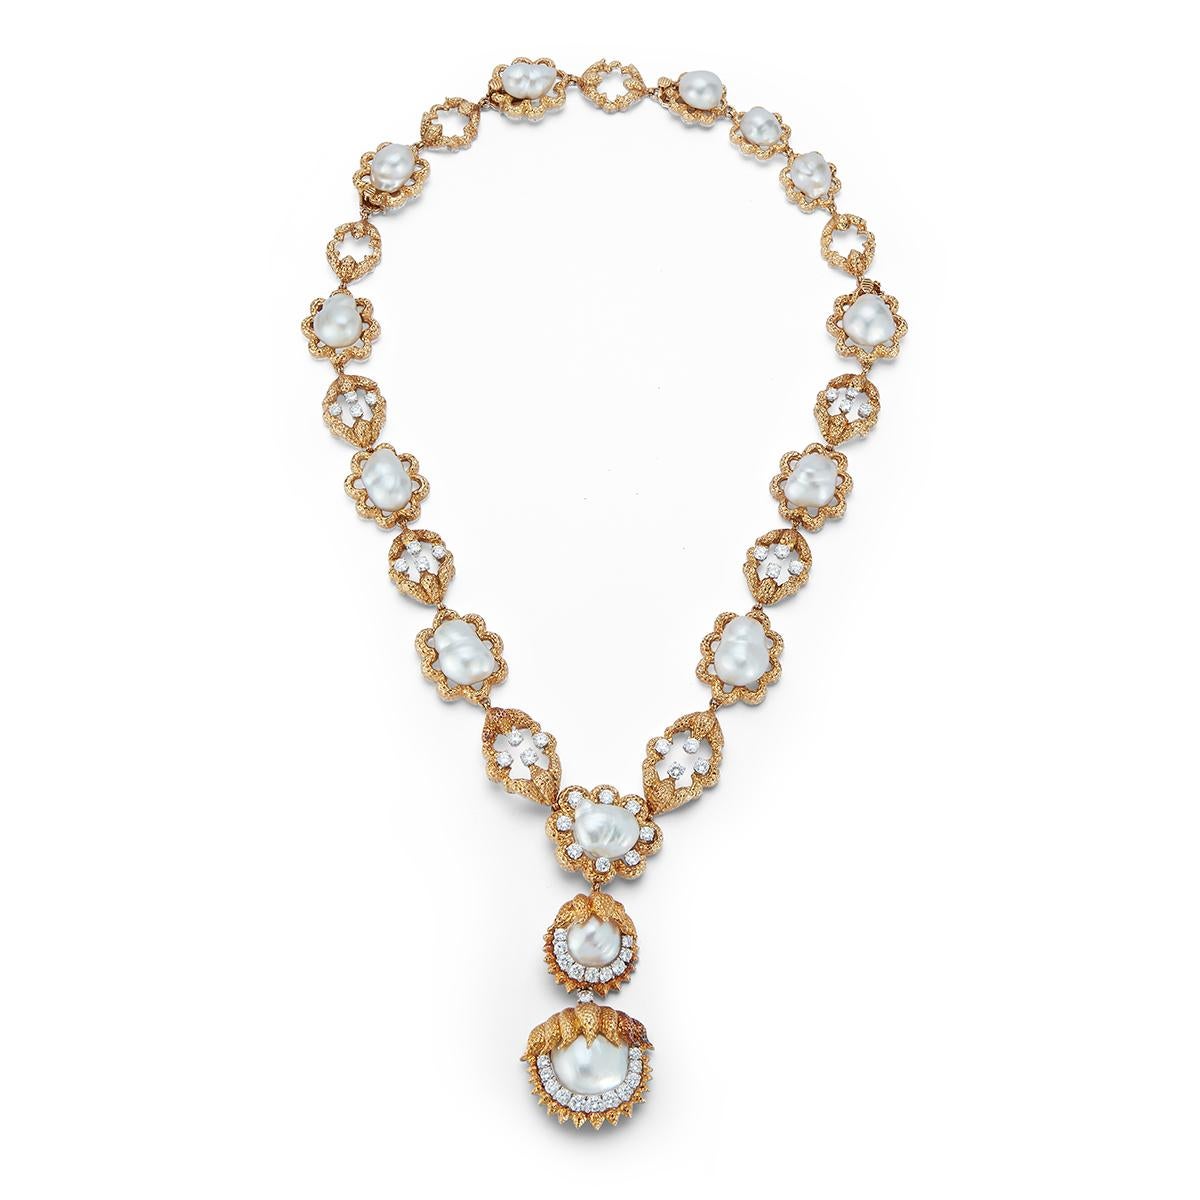 David Webb Cultured Pearl & Diamond Sautoir Necklace 
2 removable pendants & converts into a bracelet.  
Made Circa 1960
14 cultured pearls 
Round cut diamonds approximately  13.40 Cts
Necklace Measurements: 25